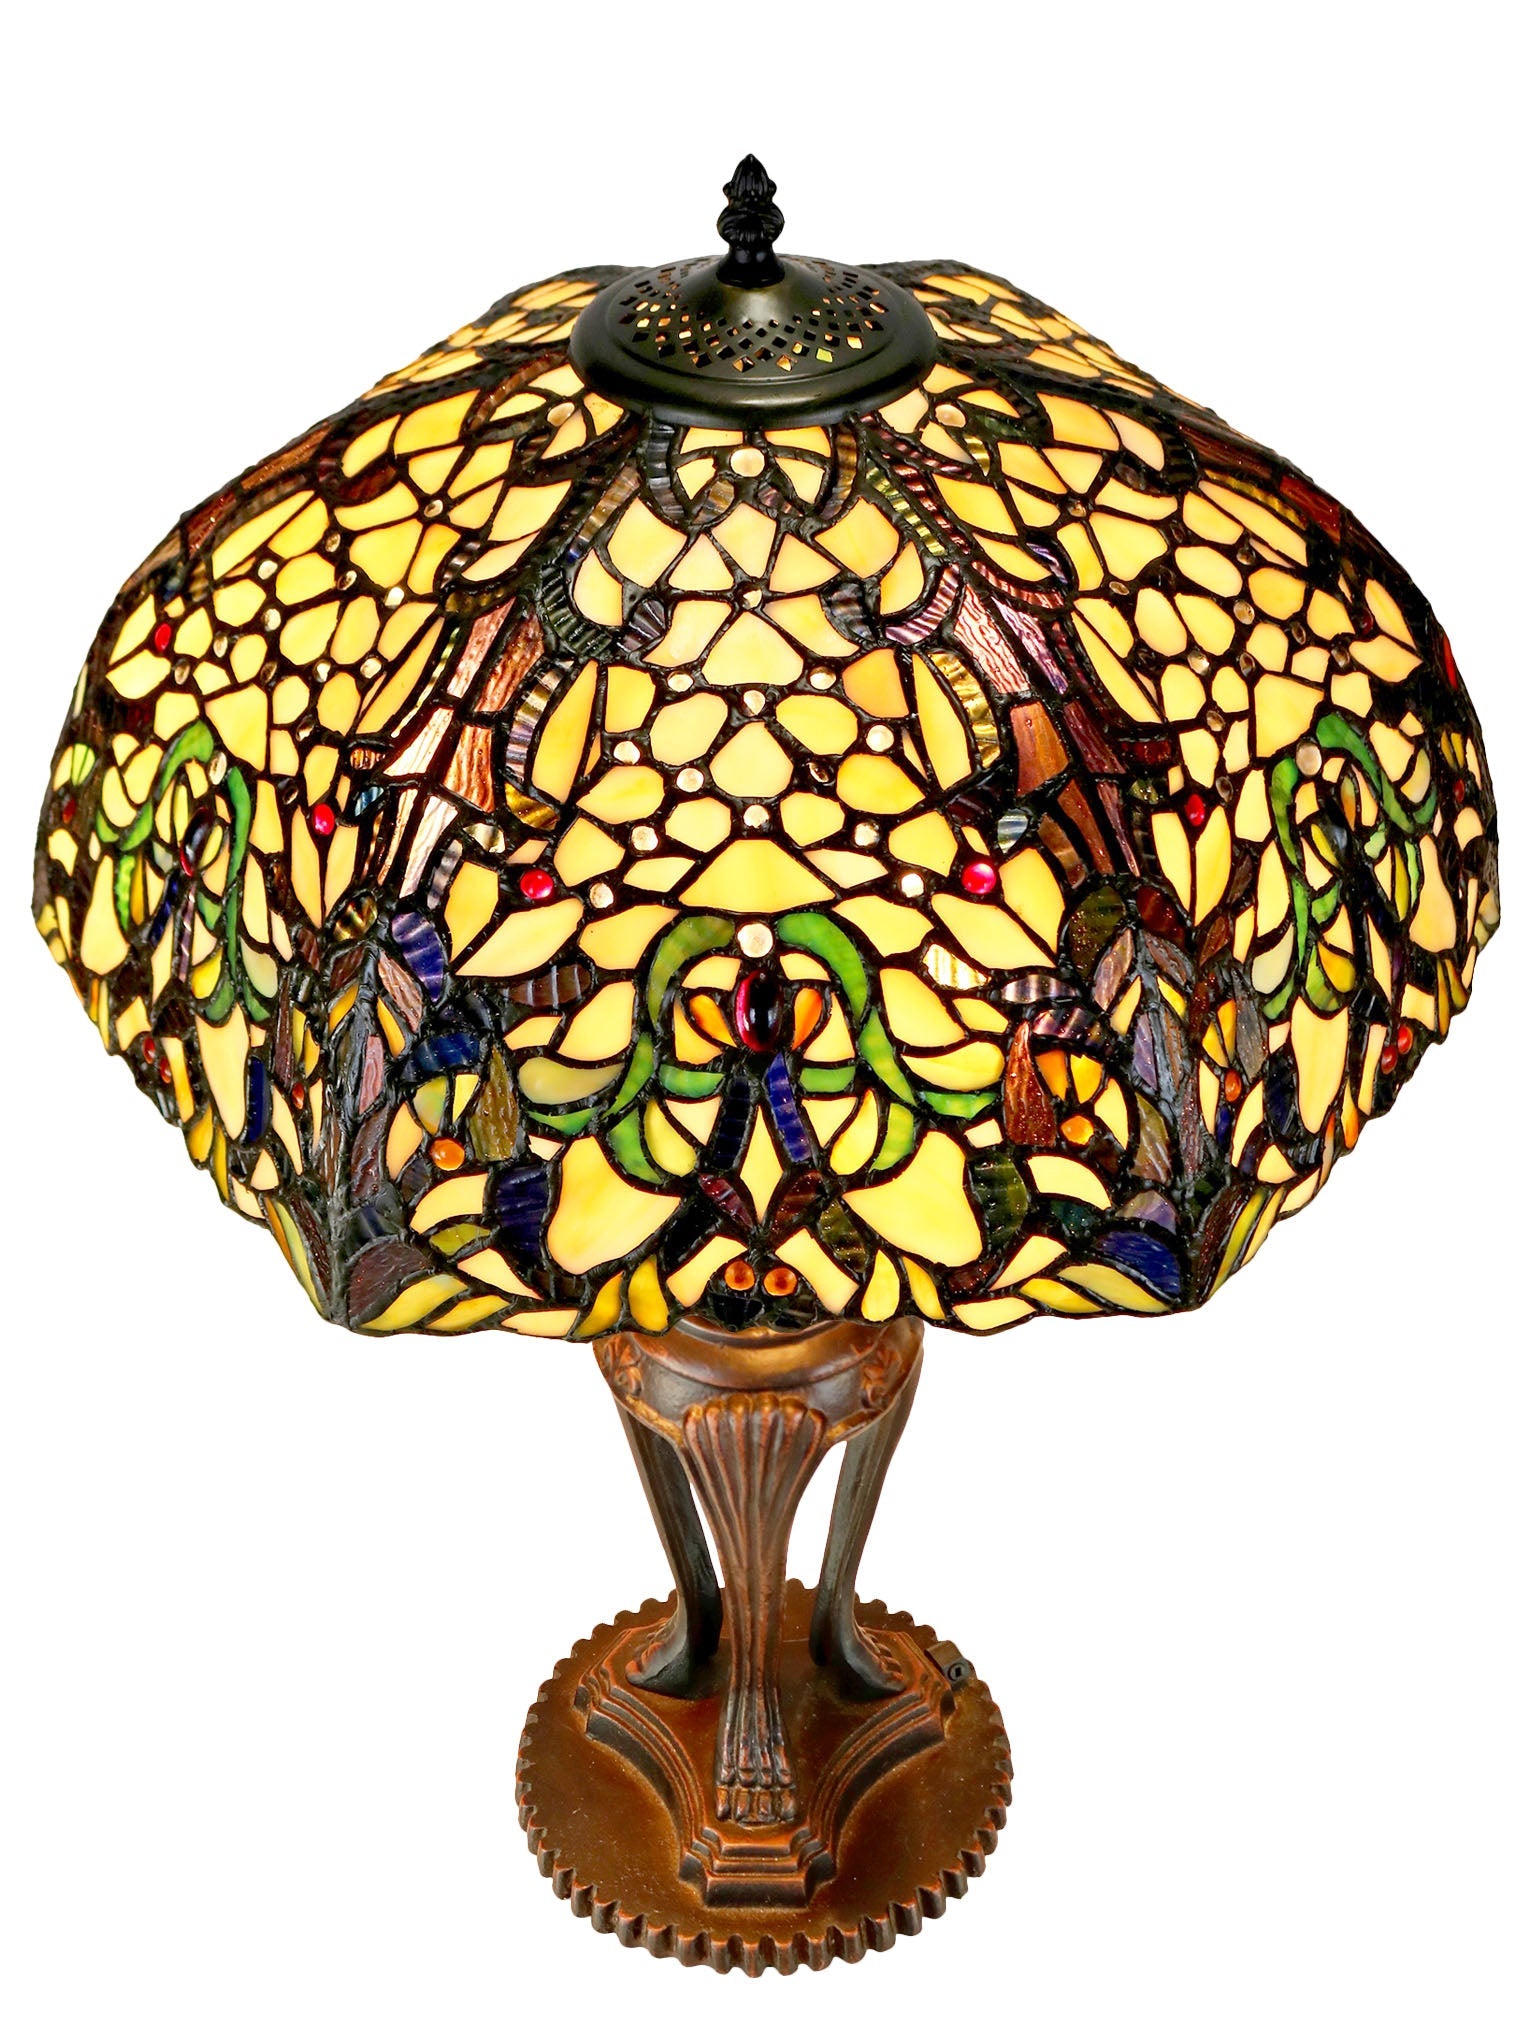 Limited Edition@Large Victorian Style Tiffany Reproduction Traditional Flower Leaf Table Lamp